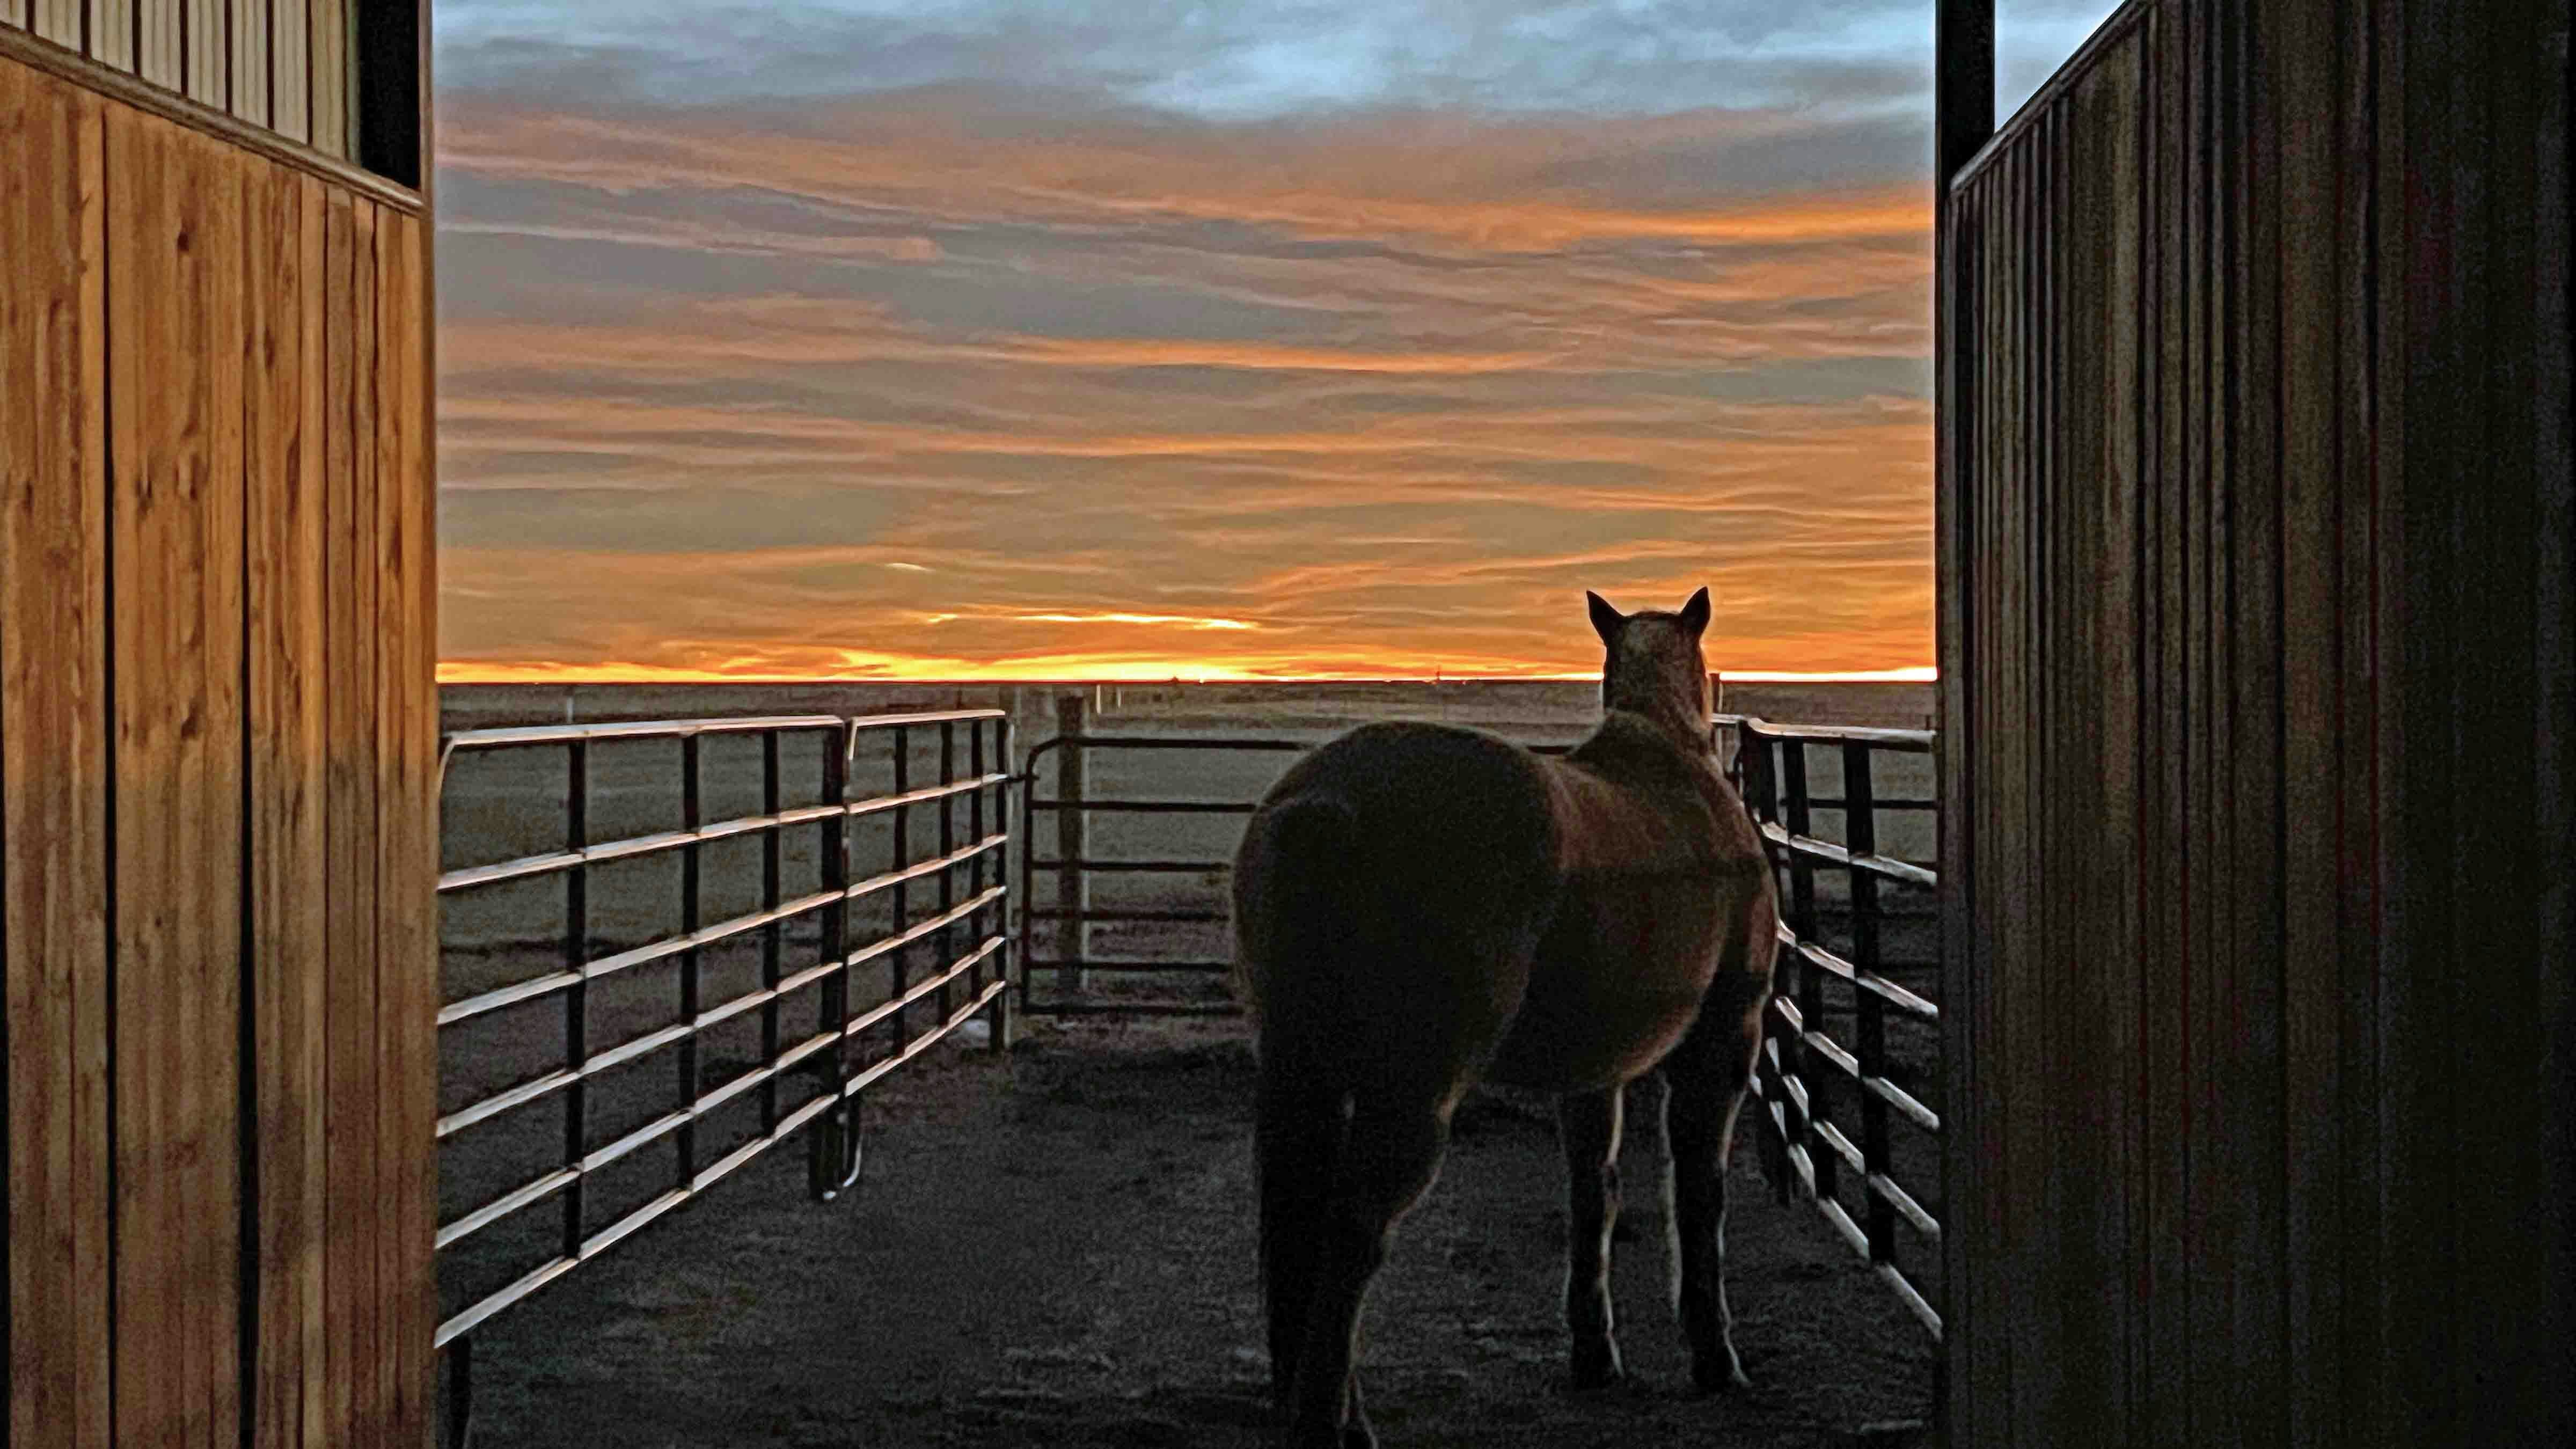 "Good morning from northwestern Laramie County. I'm envious of my gelding's sunrise theatre every morning."